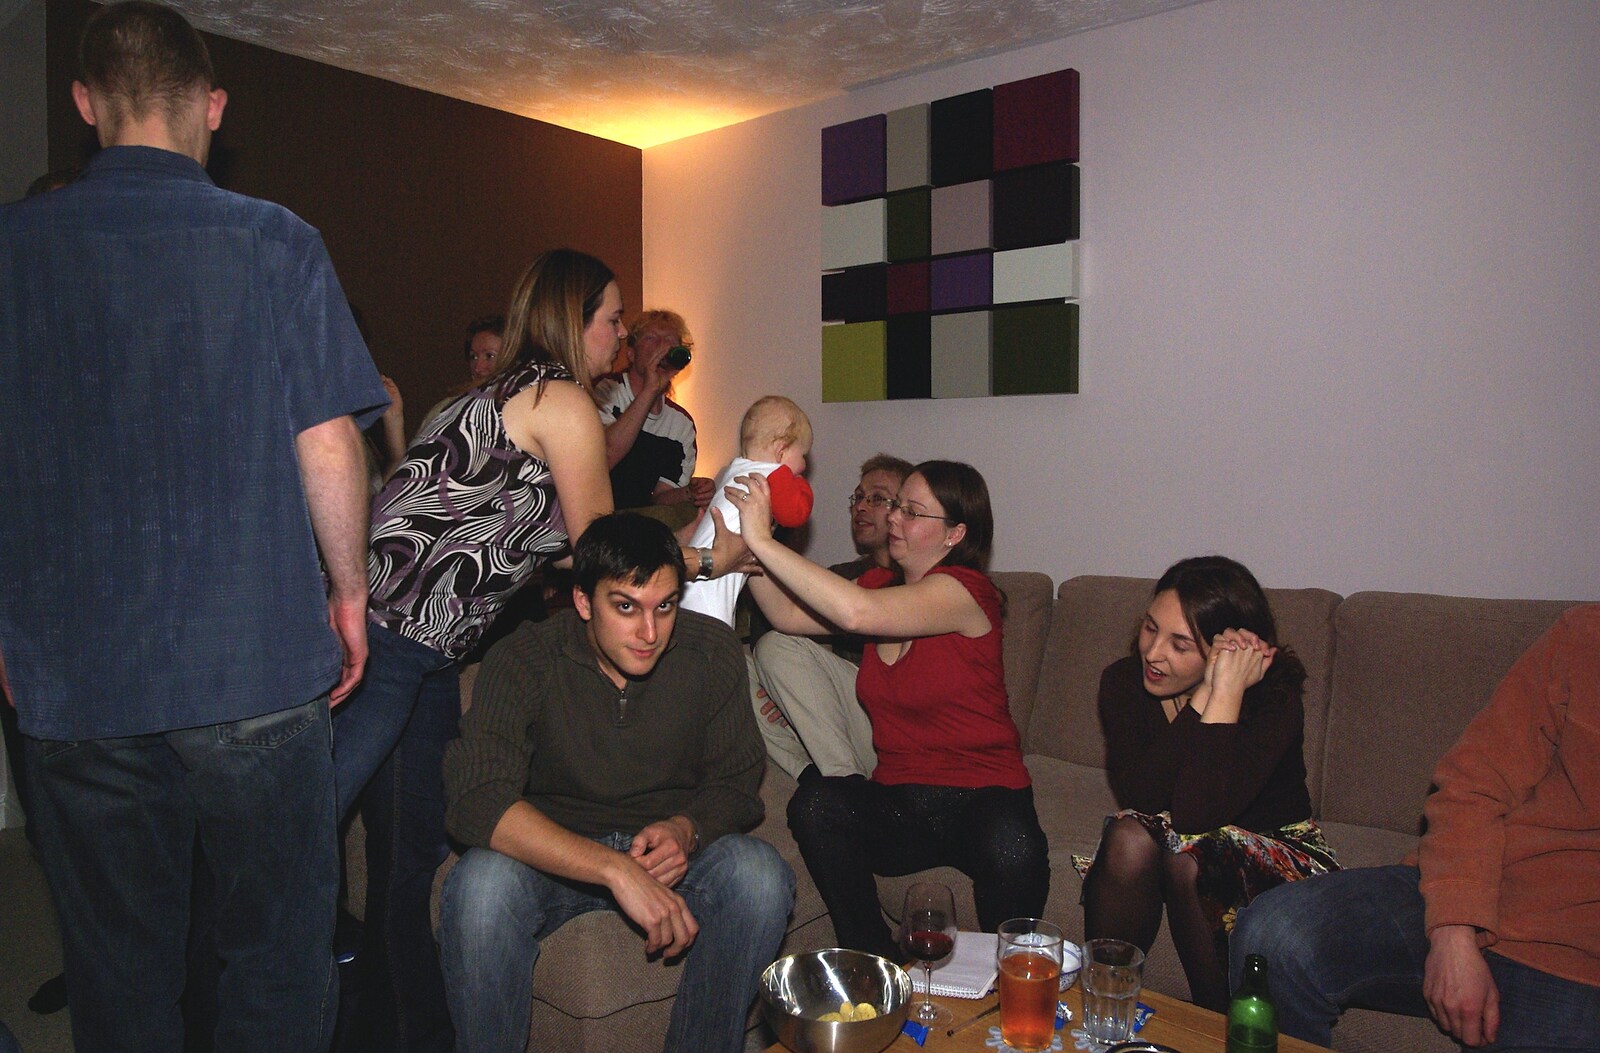 Jen's Party and The Swan's 24th, Brome and Diss, Suffolk and Norfolk - 10th November 2007: A baby is passed around as Will looks up